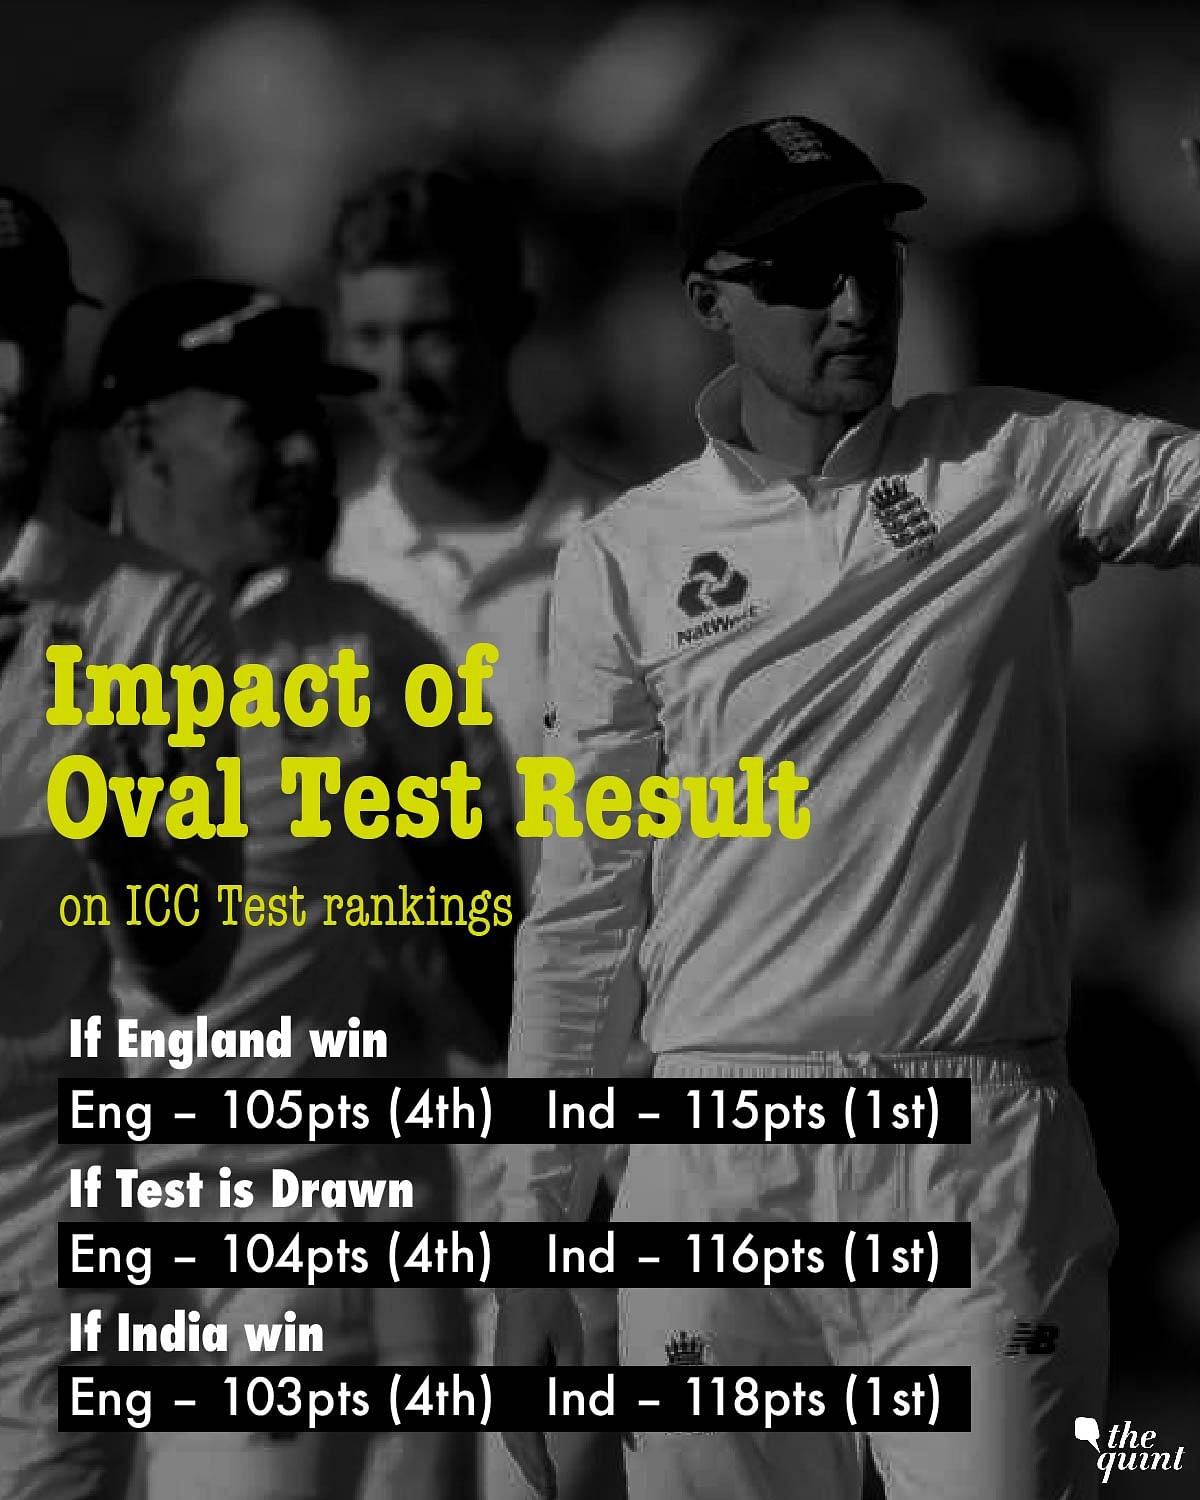 Heading into the final Test of the series, England already have the series in  kitty with an unassailable 3-1 lead.